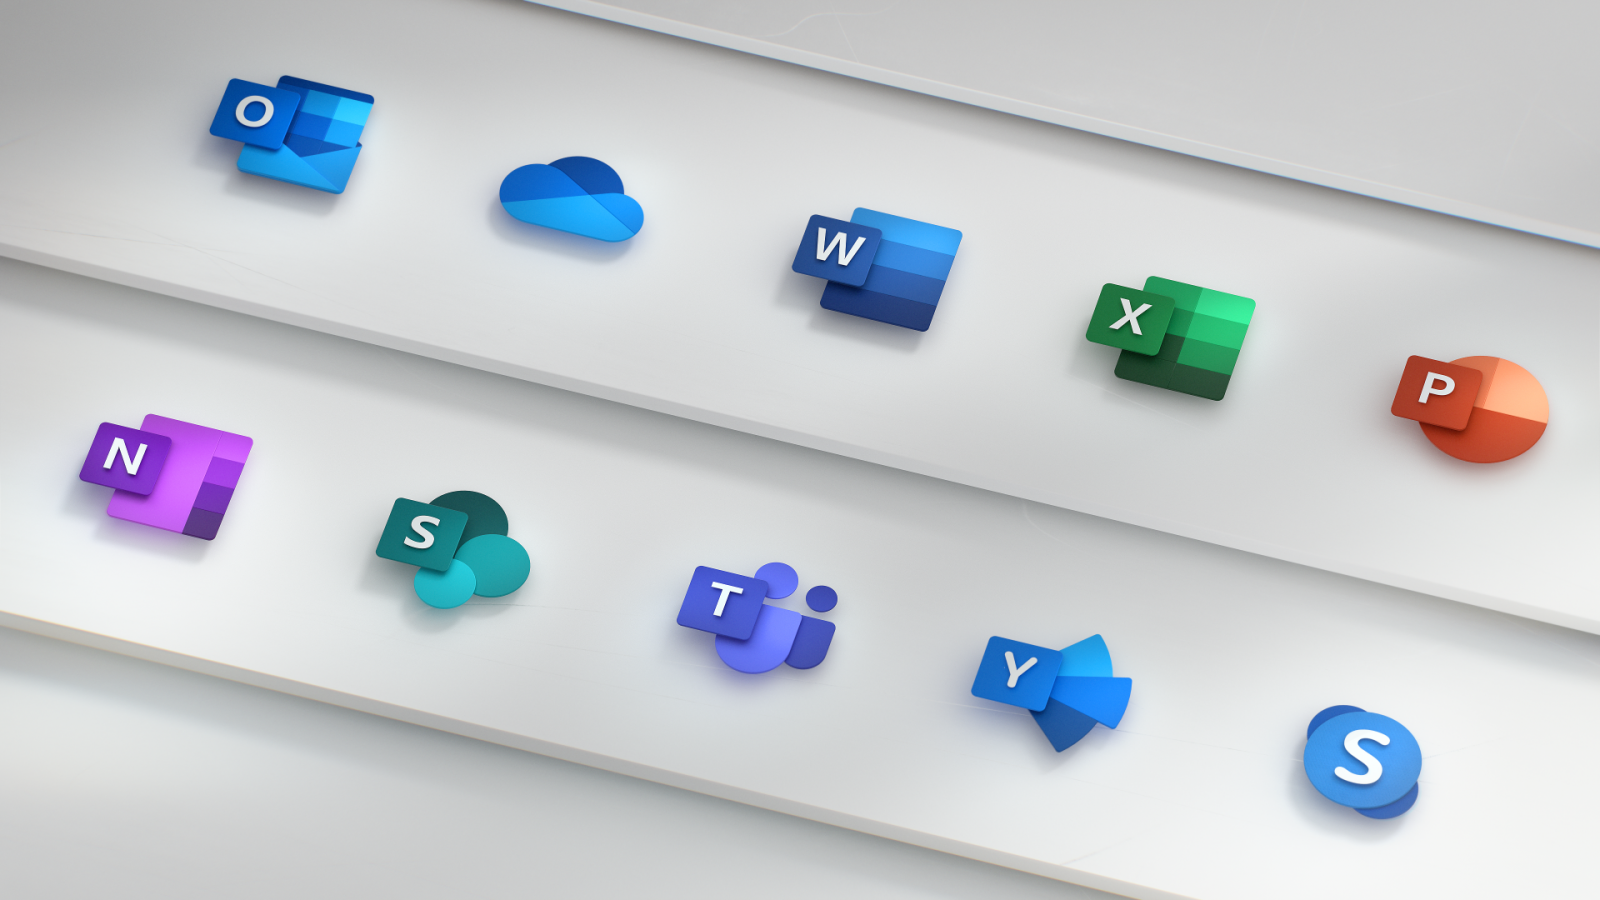 Office icons has been redesigned for new visual identity